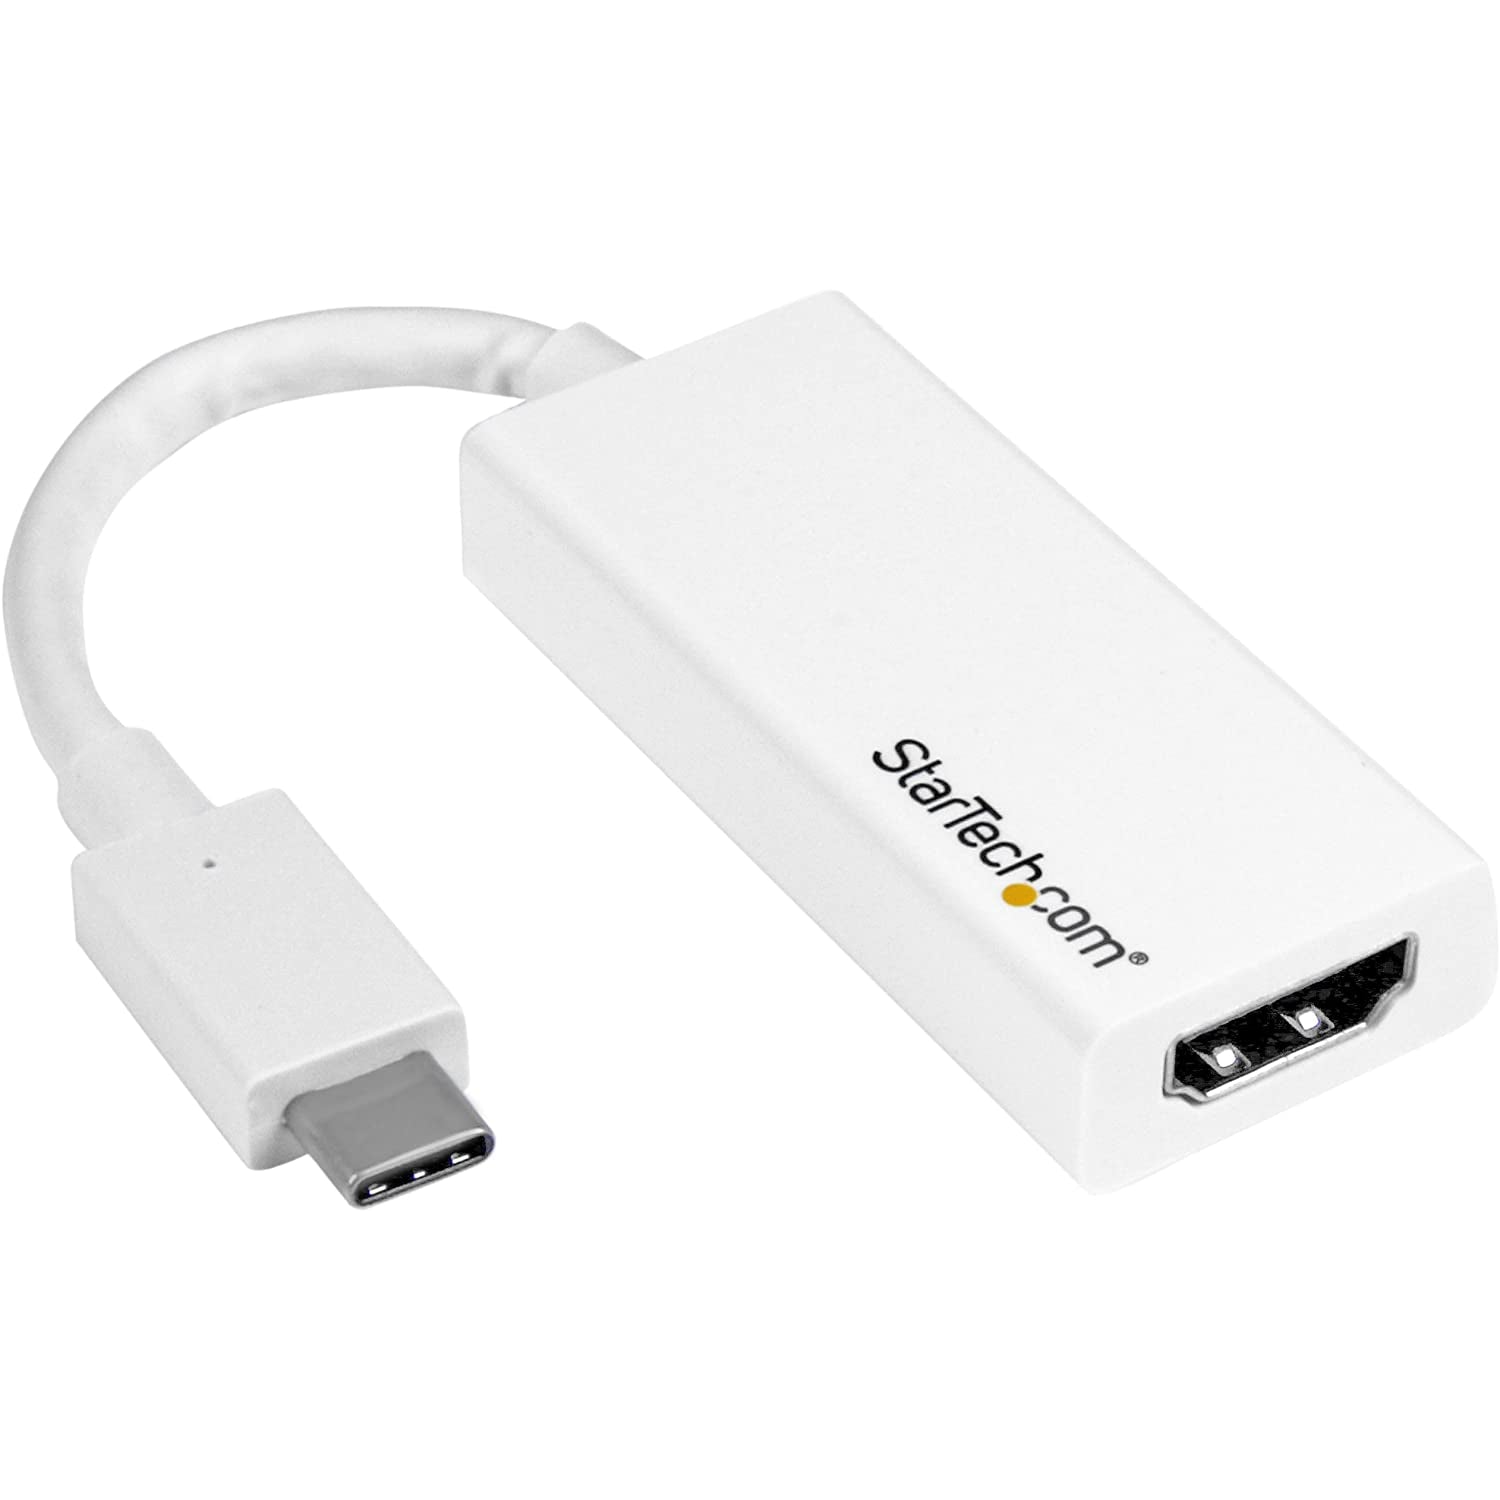 StarTech.com USB C to HDMI Adapter - 4K 30Hz - USB 3.1 Type-C to HDMI Adapter, White